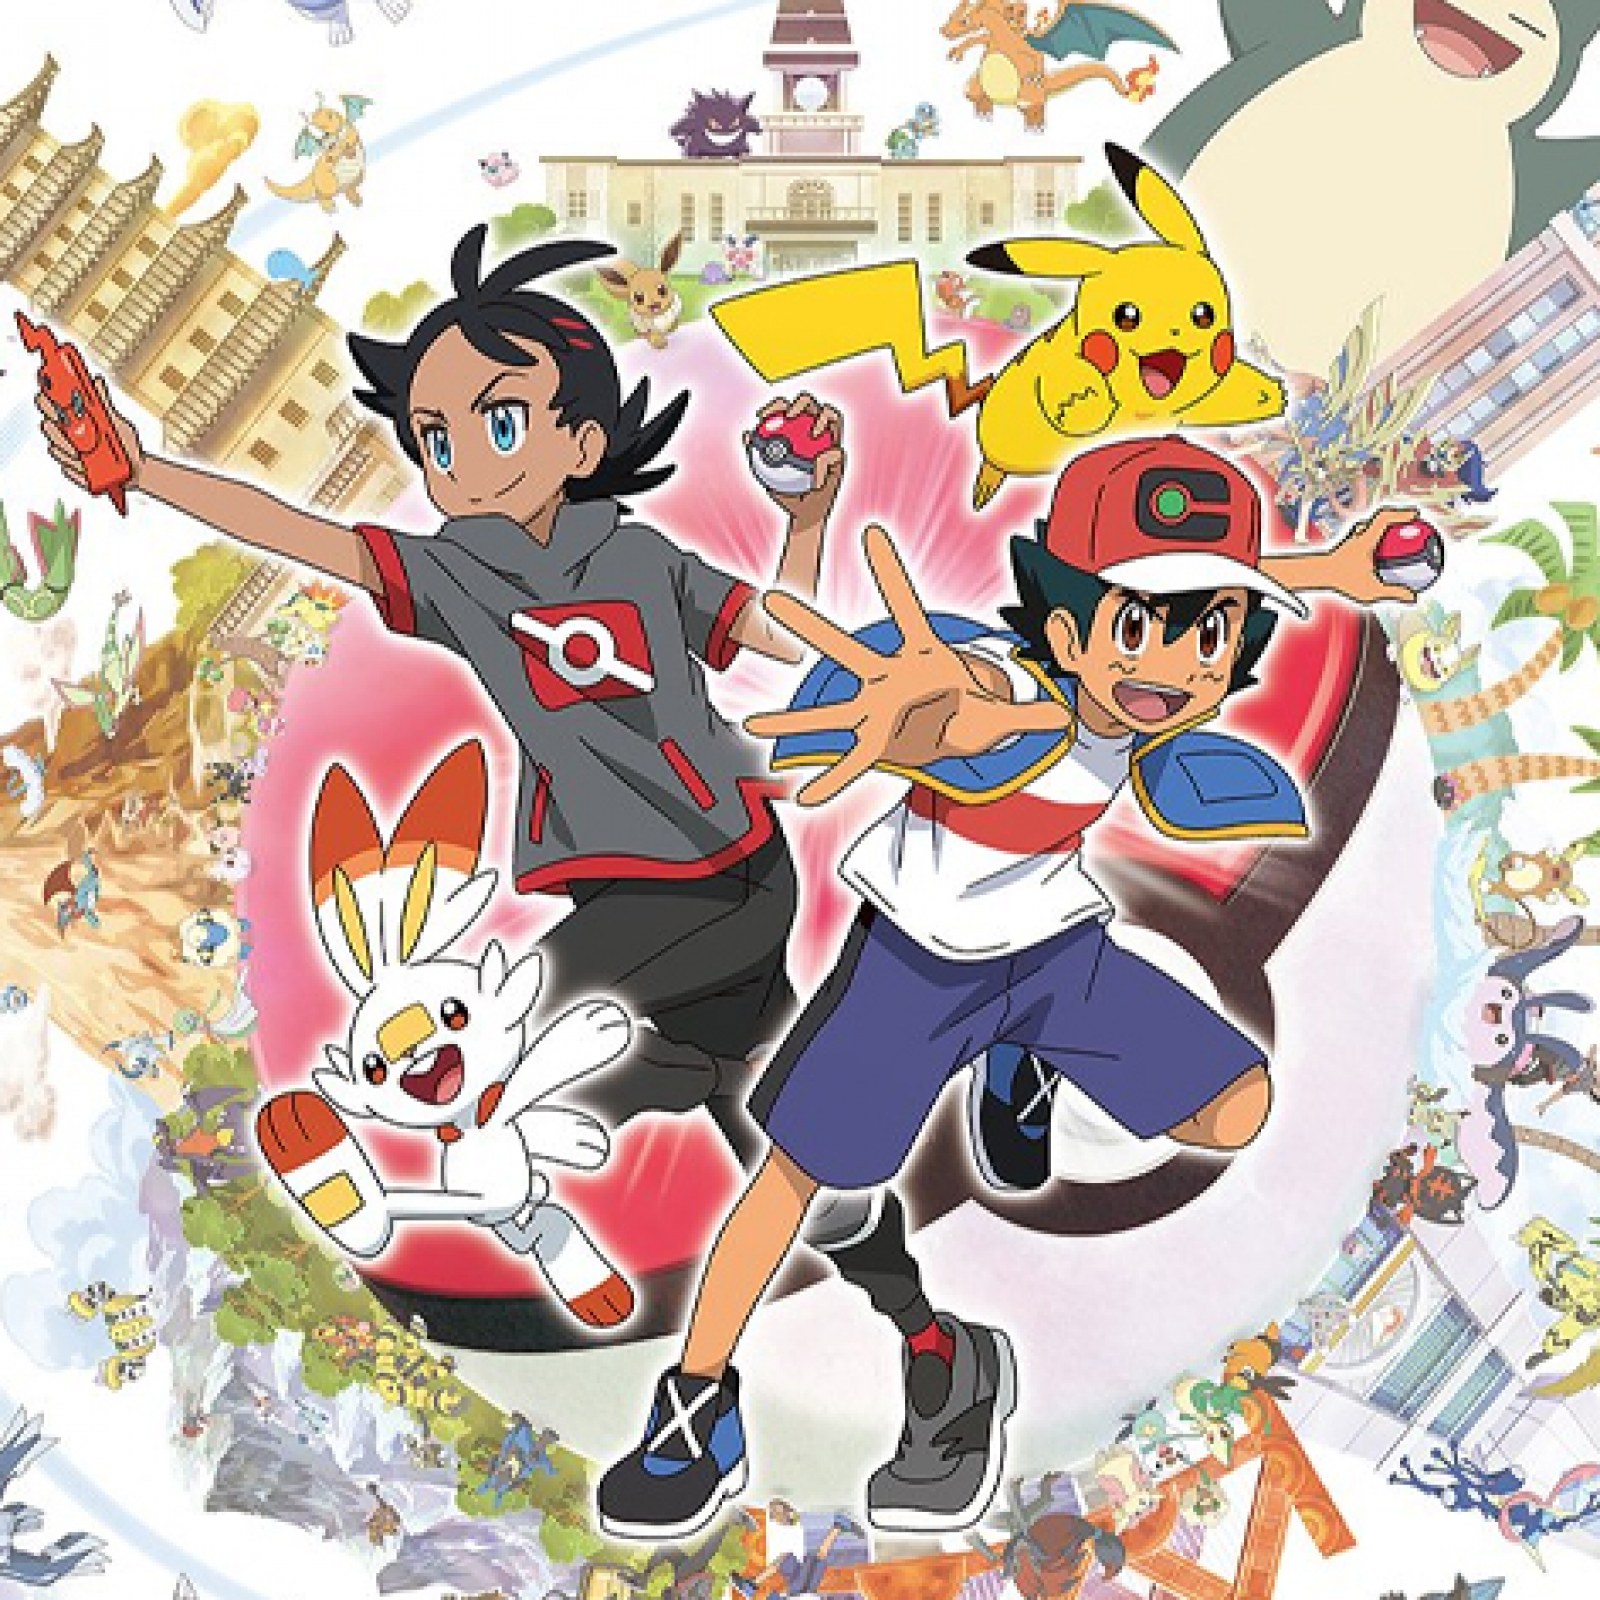 New Pokemon Anime Trailer Confirms Upcoming Series To Include Ash Pikachu And New Character